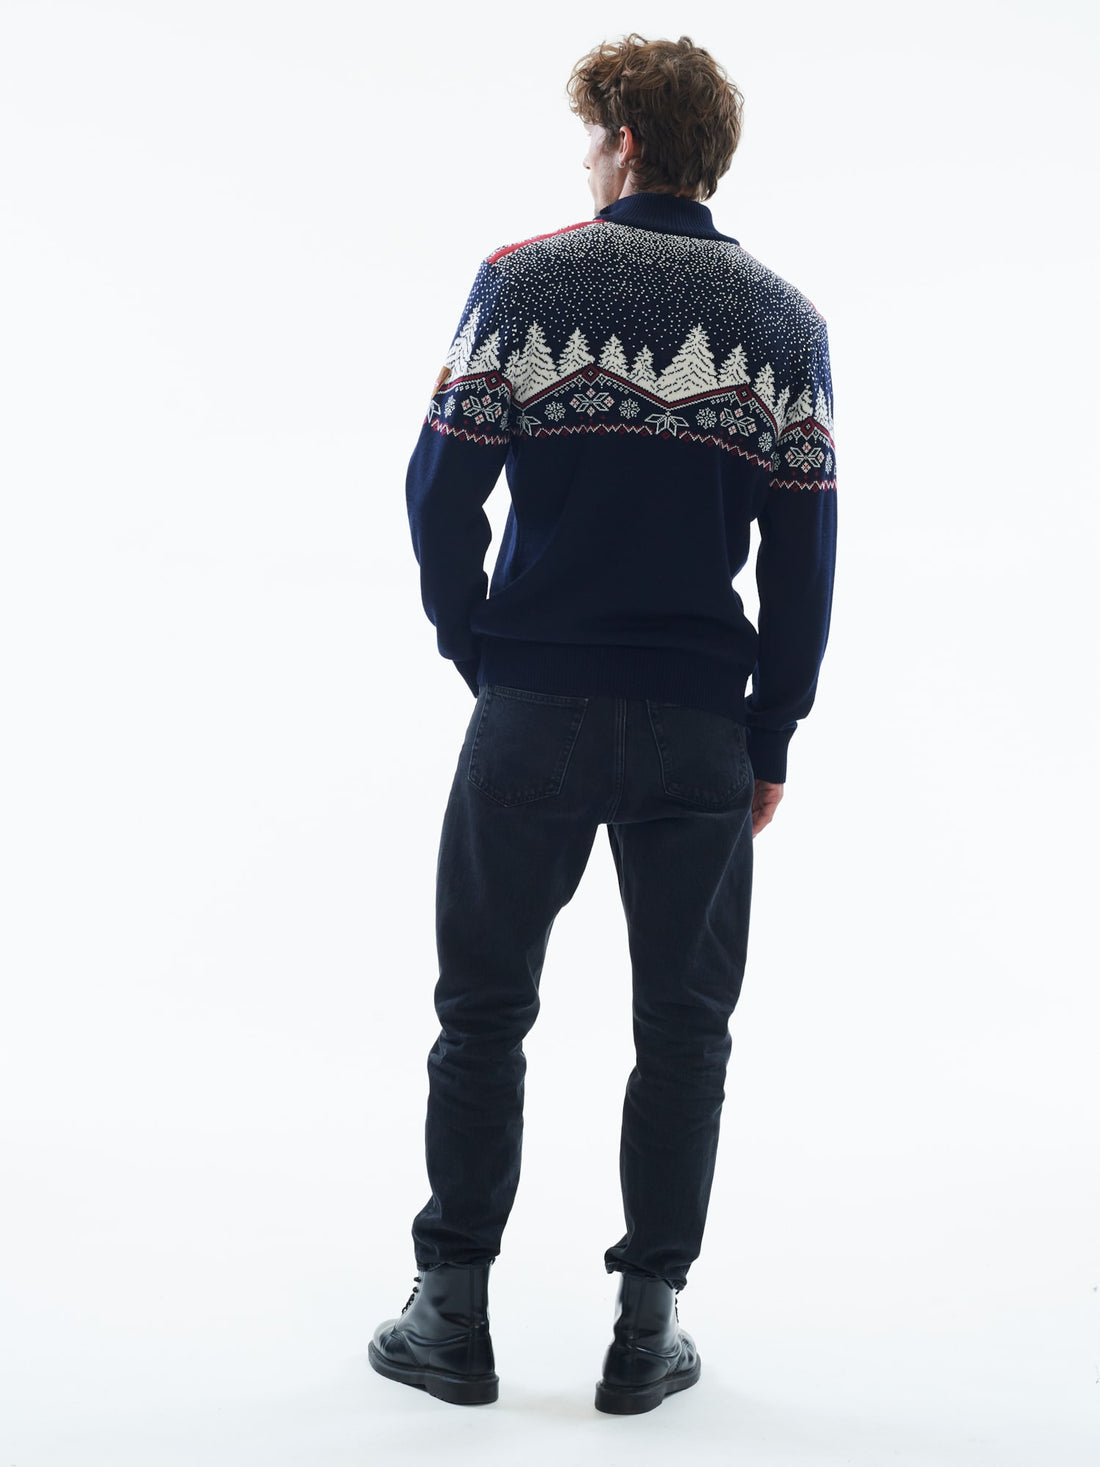 Dale of Norway - Christmas Men's Sweater - Navy